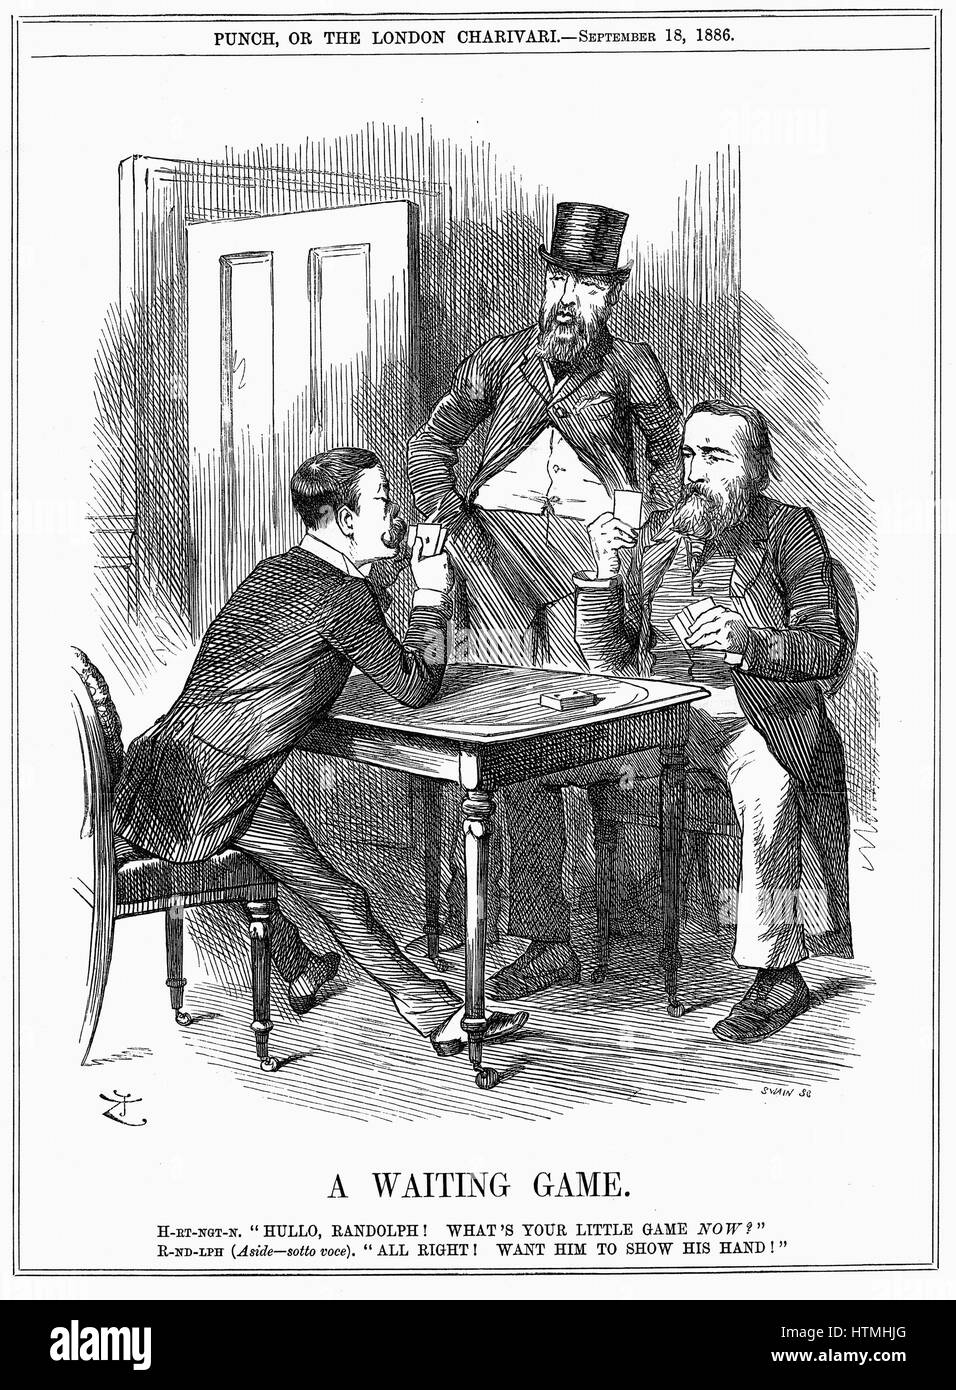 Lord Randolph Churchill (left) trying to make Charles Stewart Parnell, Irish politician, show his hand and let Churchill and Hartington know how he will use Parnellite votes he commands in House of Commons. John Tenniel cartoon from 'Punch' 18 September 1886. Engraving Stock Photo